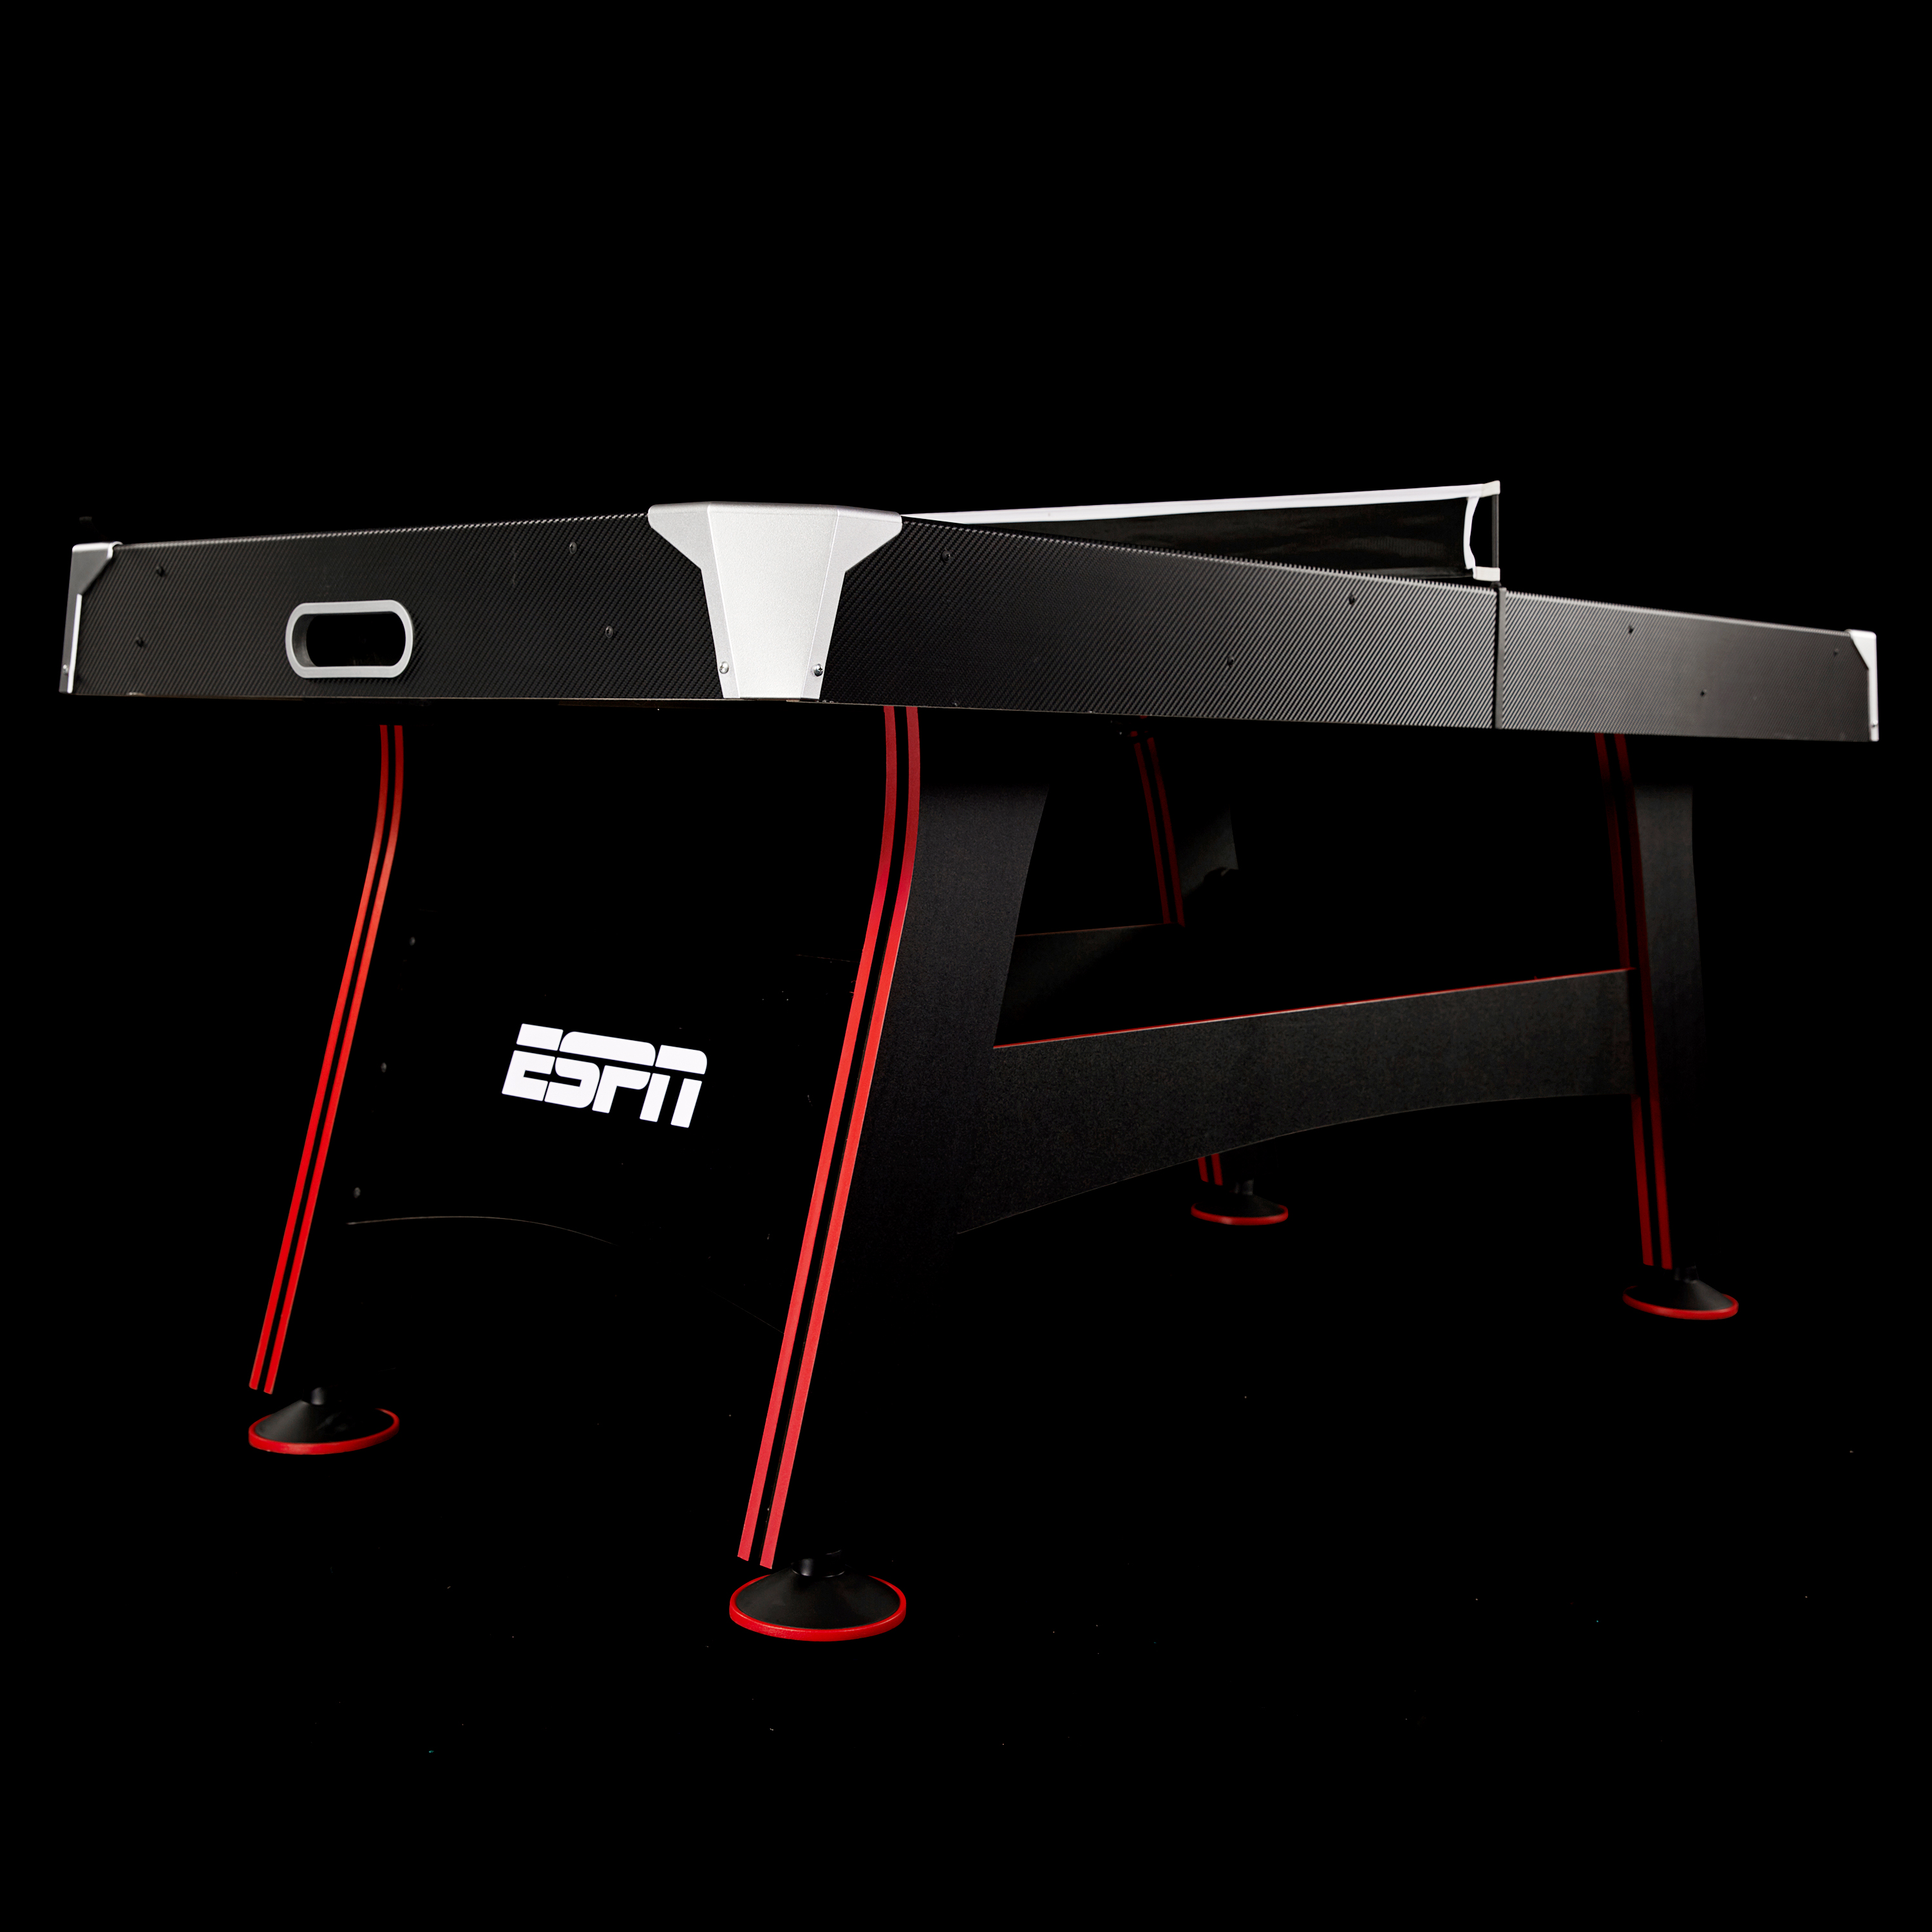 ESPN 72" Air Hockey Game Table & Table Tennis Top, Accessories Included, Black/Red - image 4 of 13